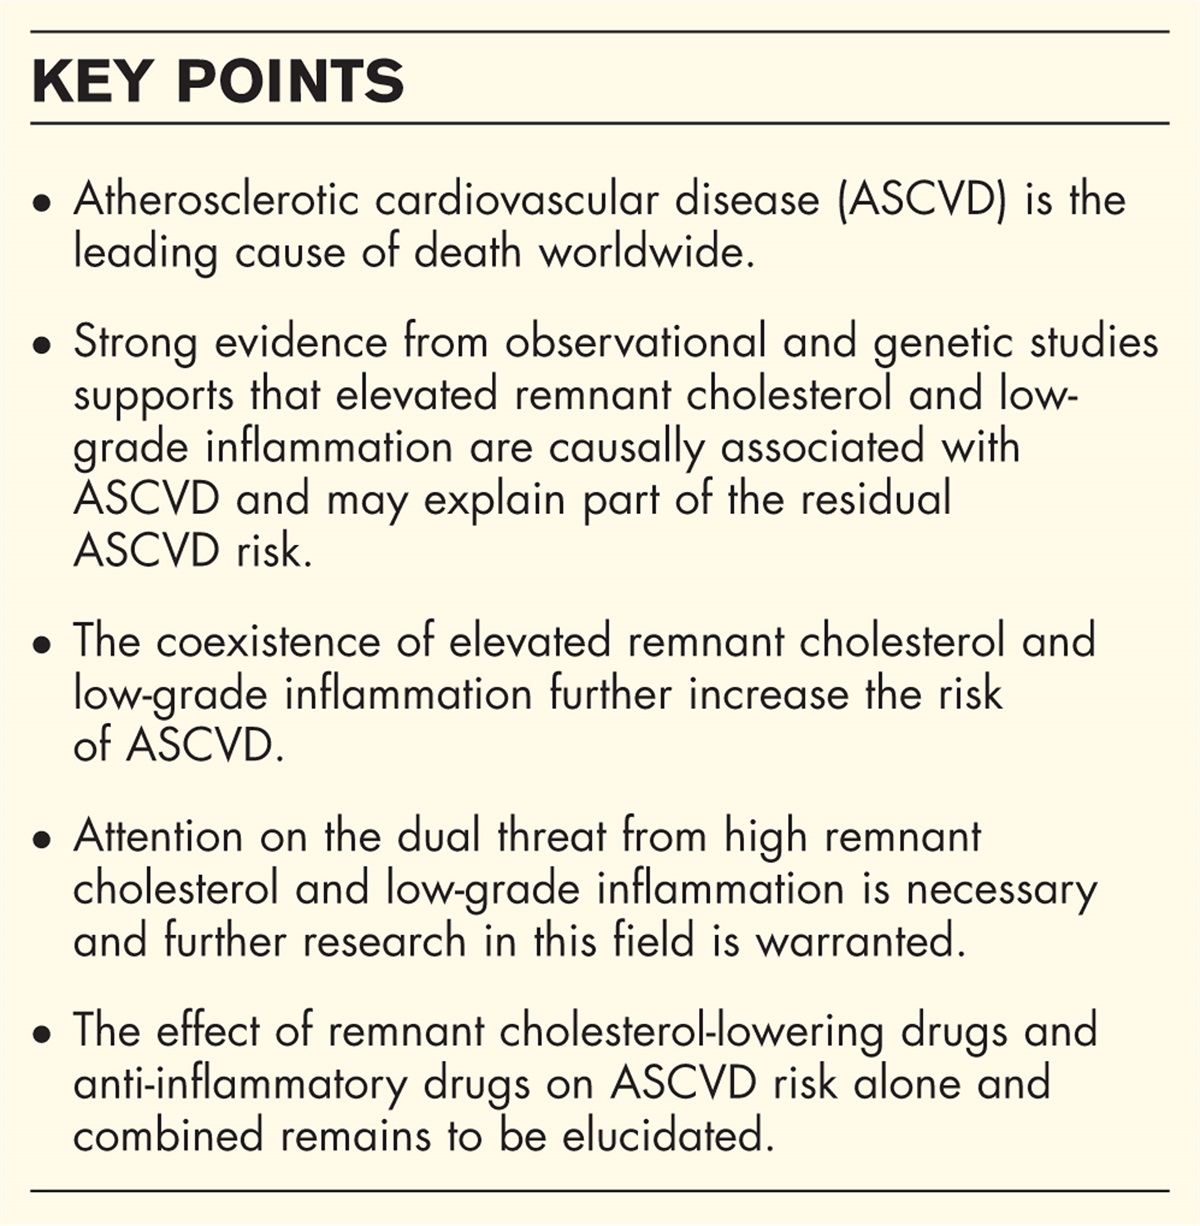 Remnant cholesterol and low-grade inflammation jointly in atherosclerotic cardiovascular disease: implications for clinical trials